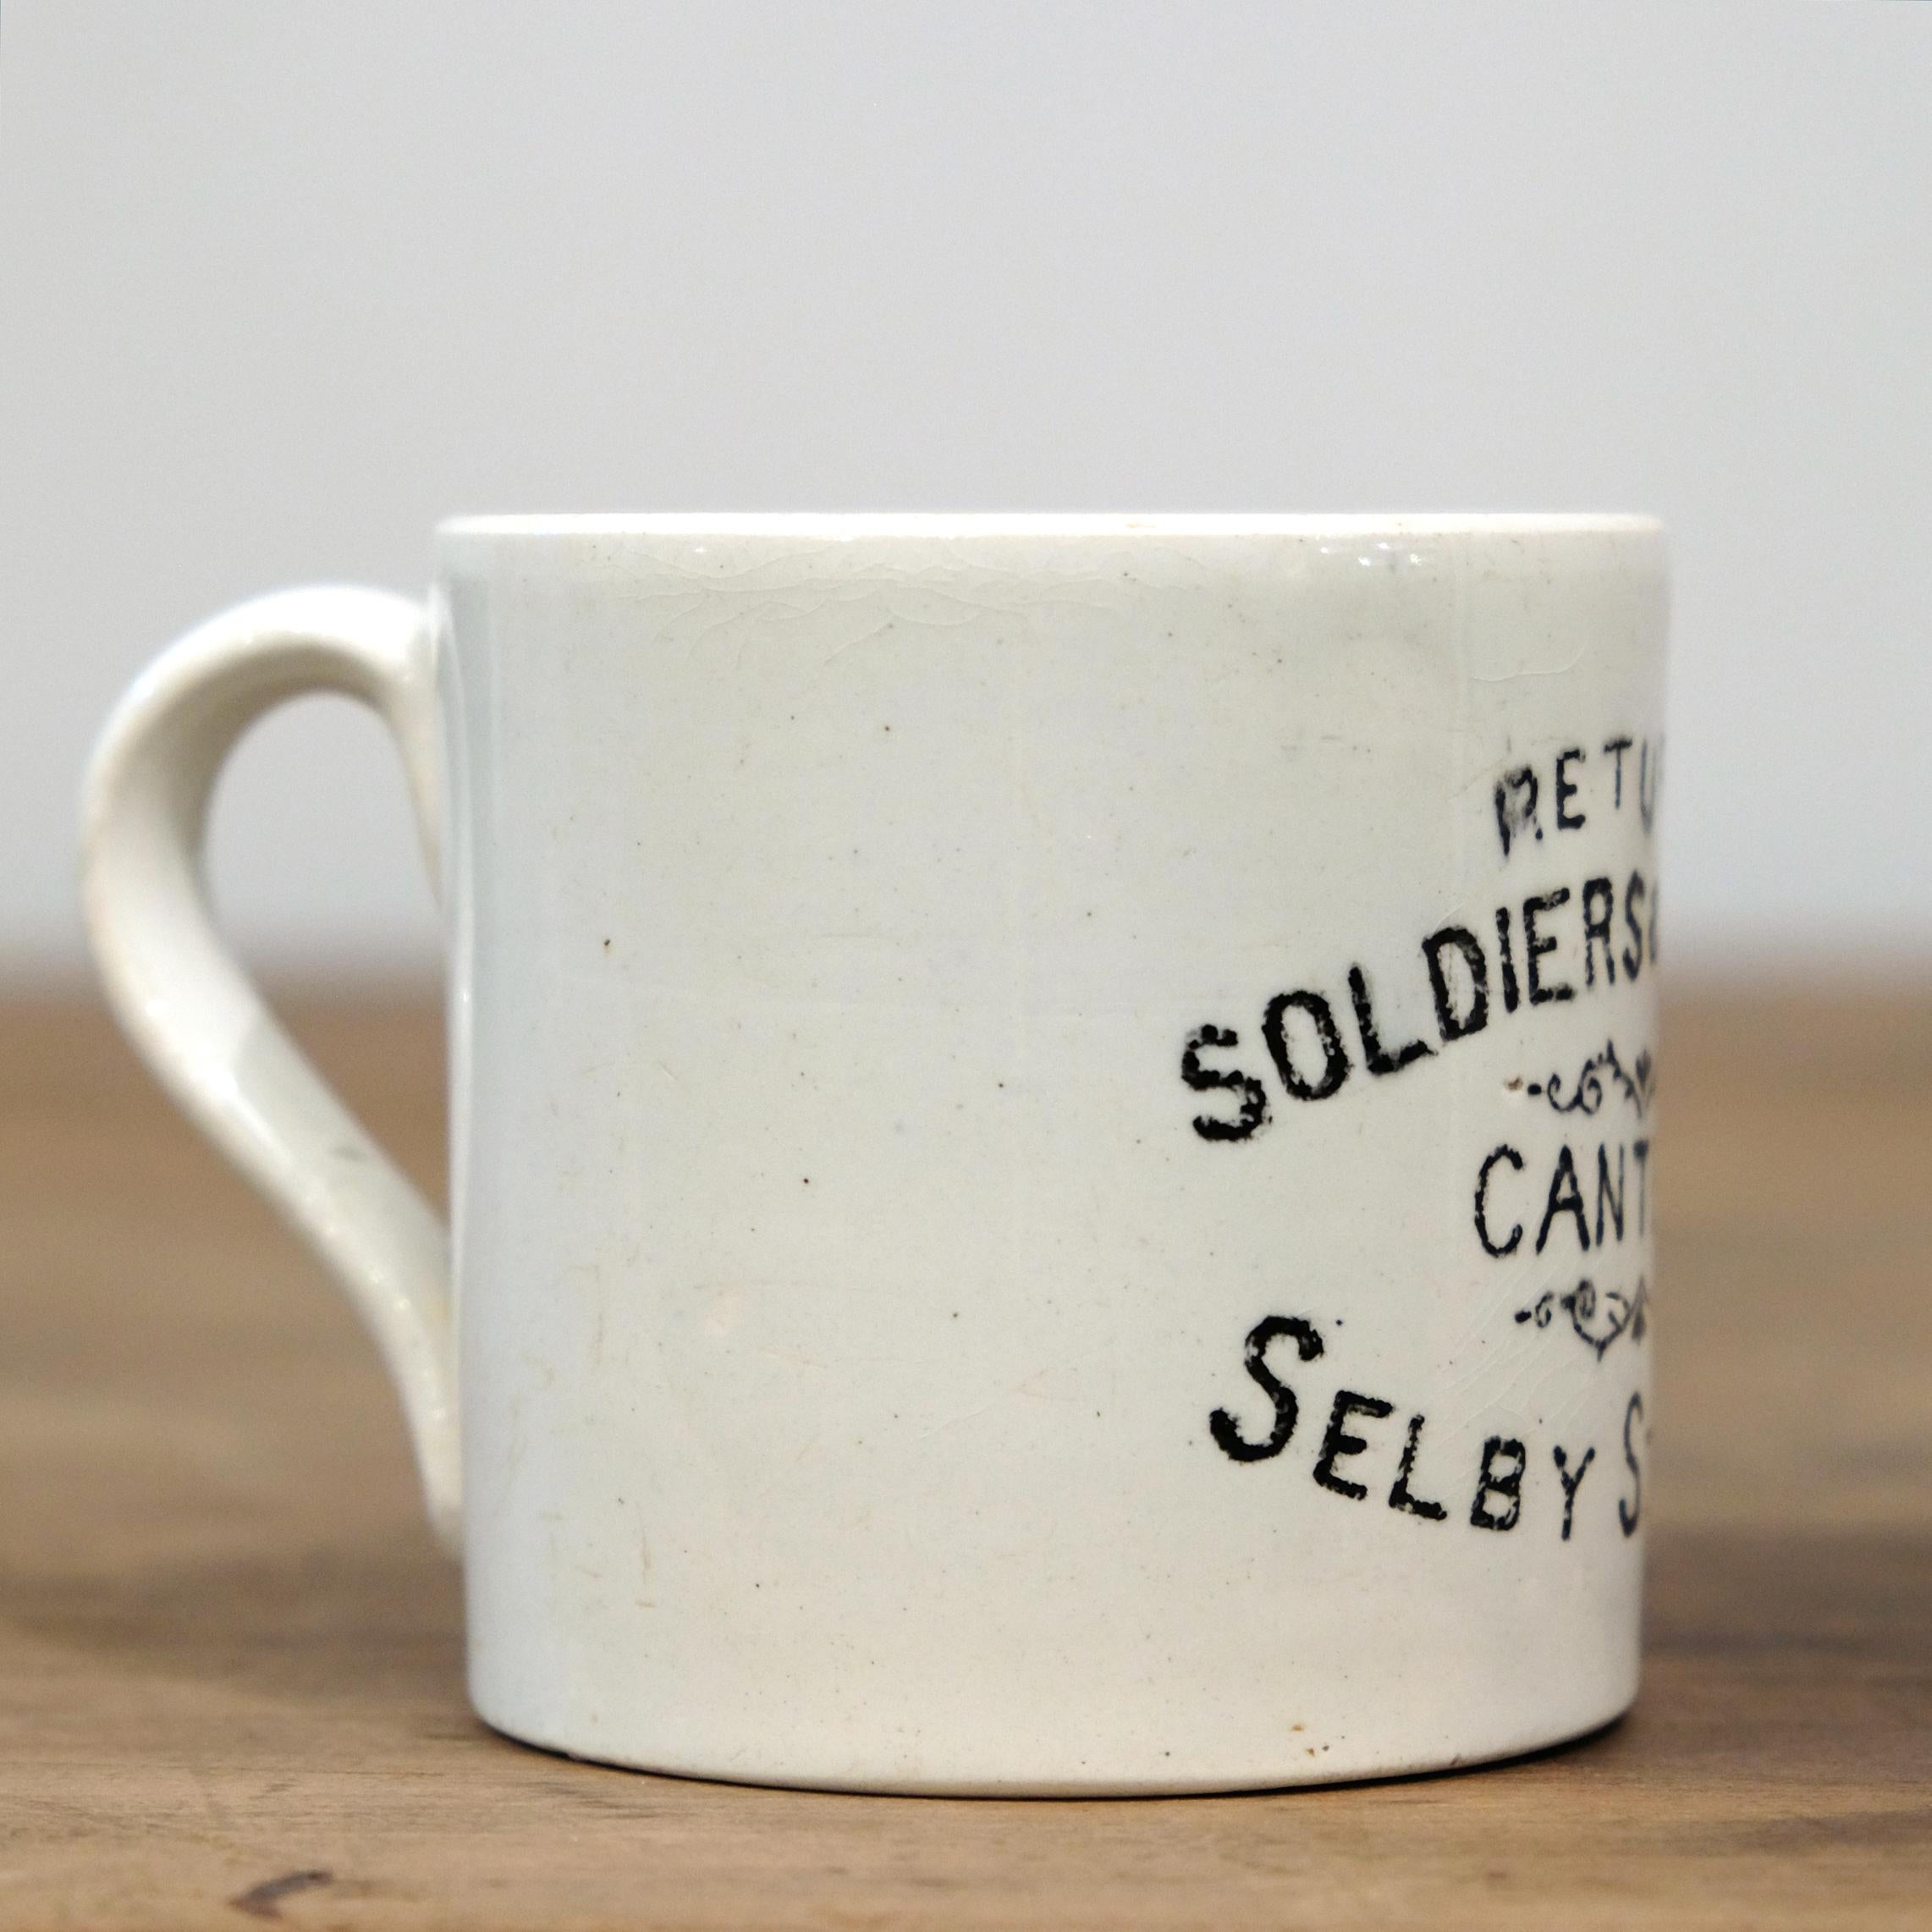 First World War period canteen mug from the soldiers & sailors canteen at Selby station. Made by W. Gill & Sons of Castleford in Yorkshire. c.1915-1919

A rare piece of British history.

In almost perfect condition, bar some slight discoloration